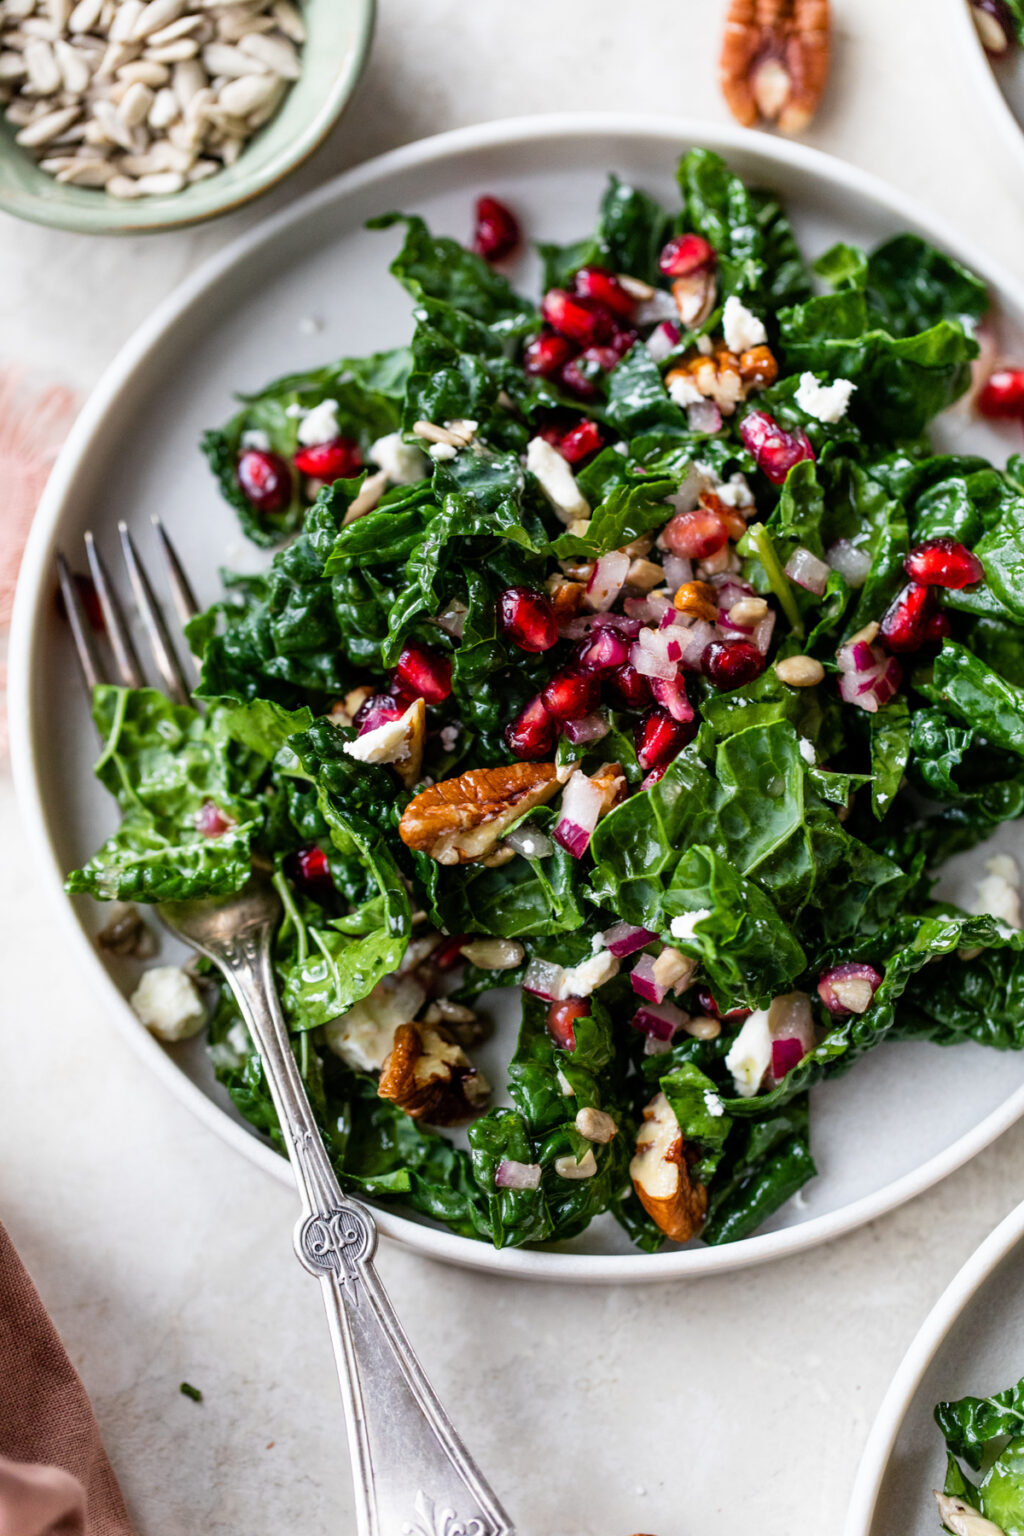 Winter Salad (with Kale and Pomegranate) « Clean & Delicious